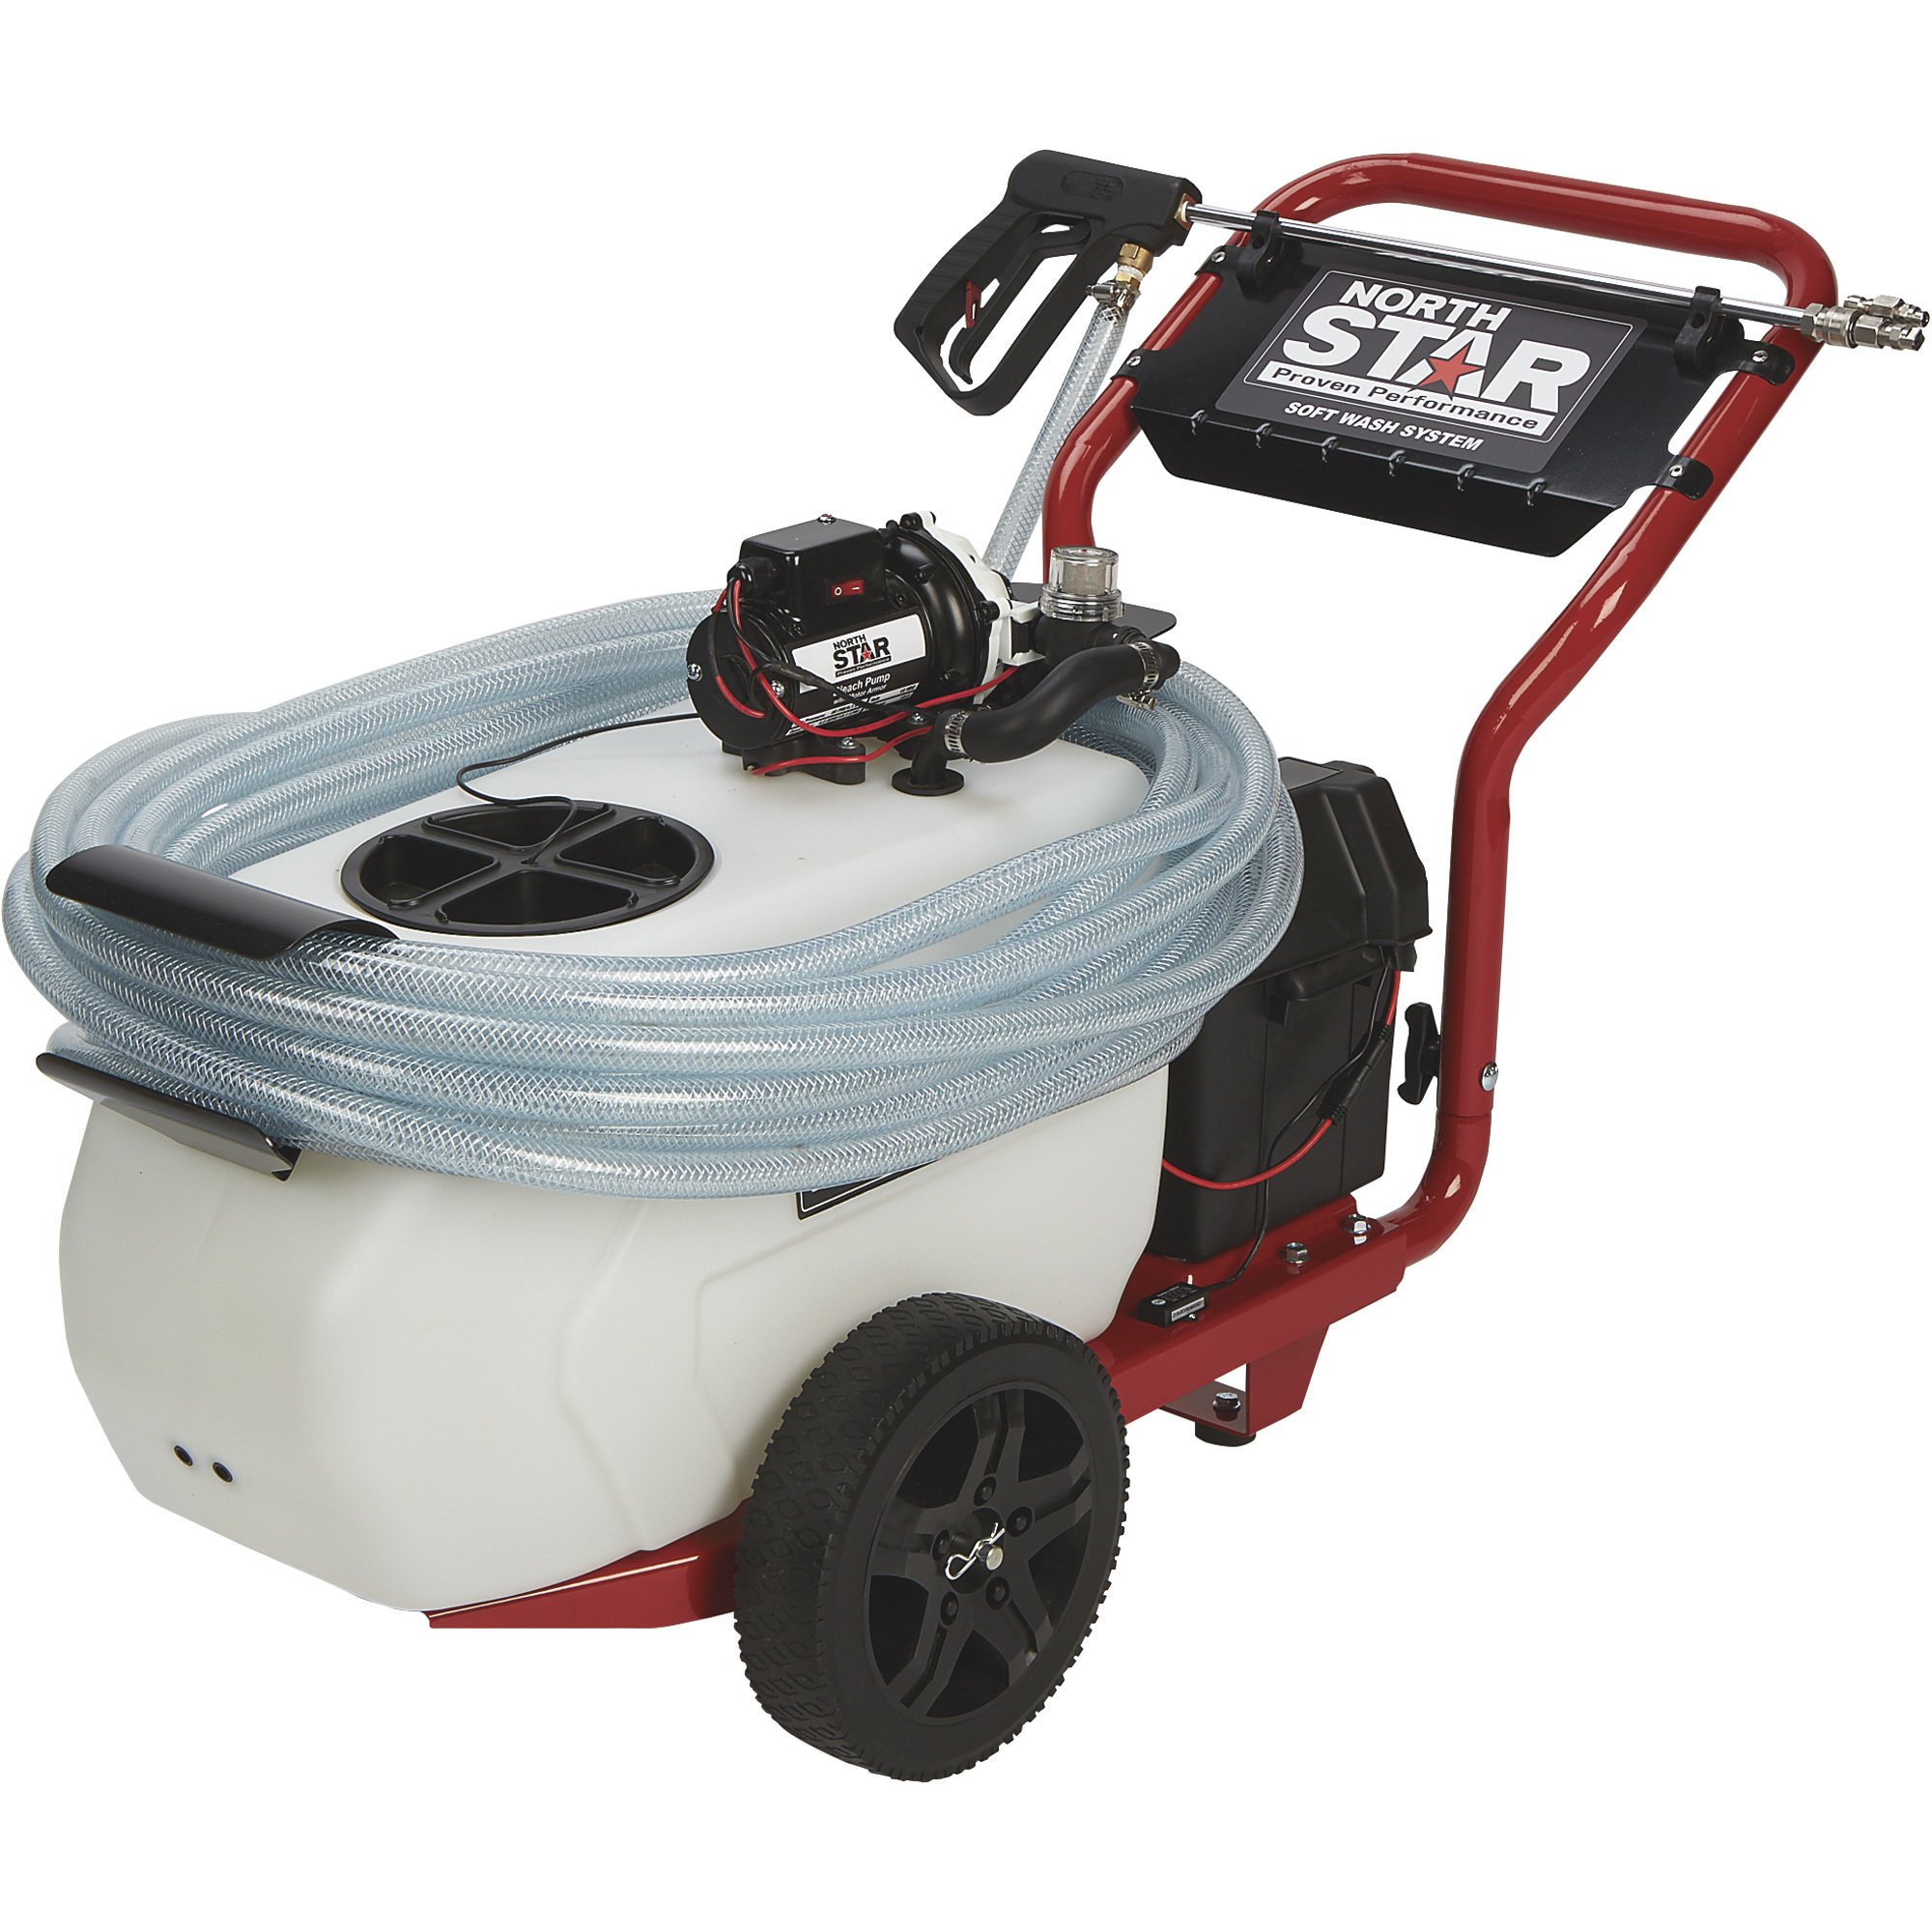 NorthStar Portable Soft Wash and Disinfectant System with 4.0 GPM